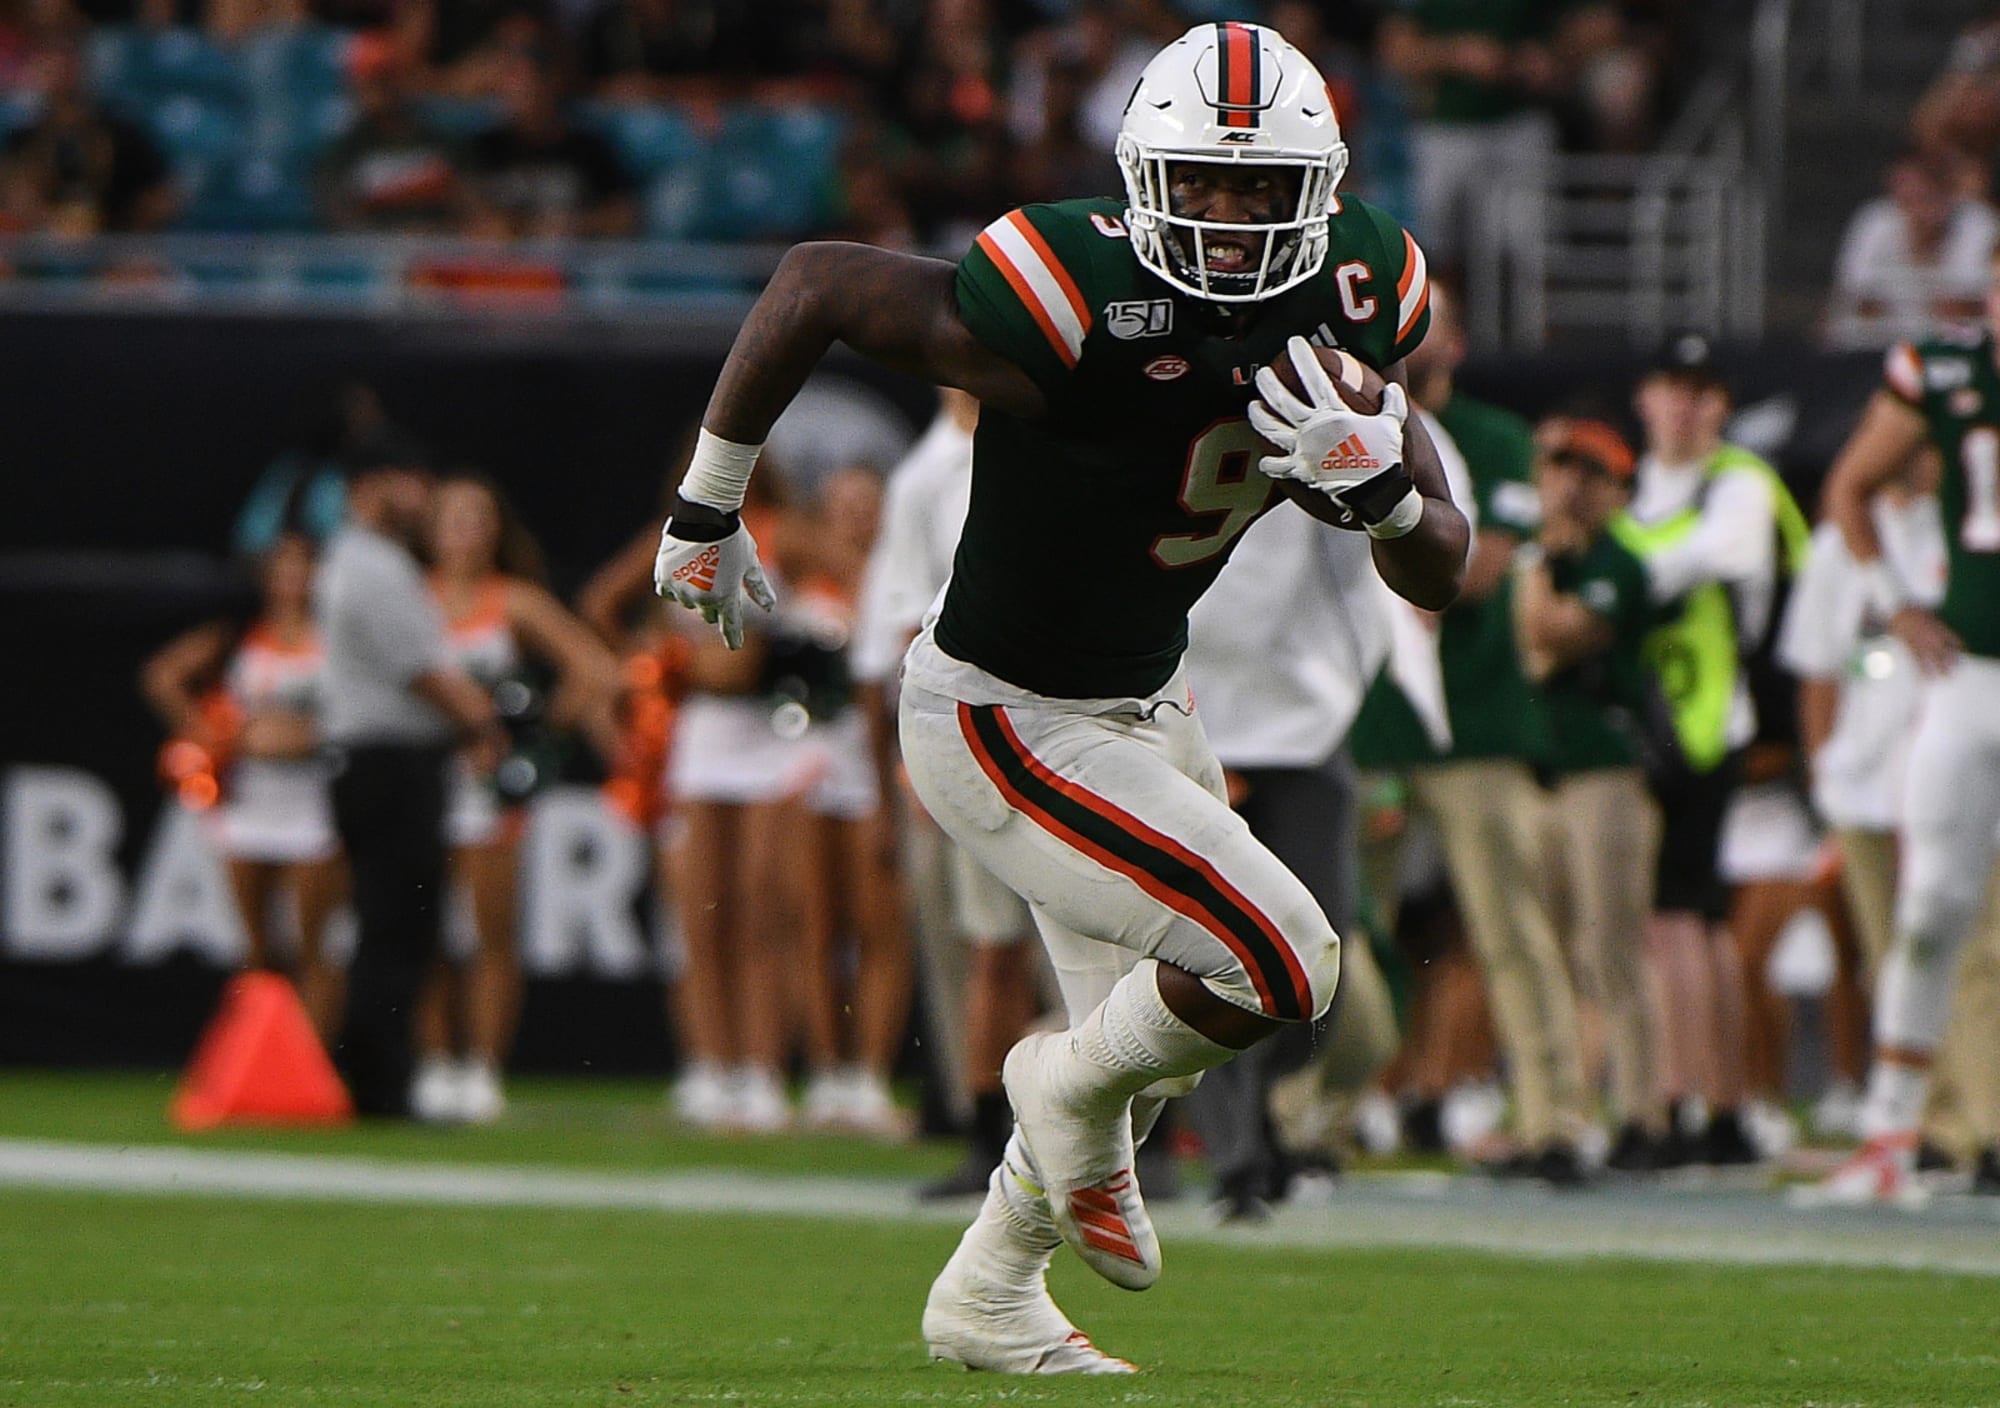 2021 NFL Draft Strong start for group of Miami Hurricanes prospects